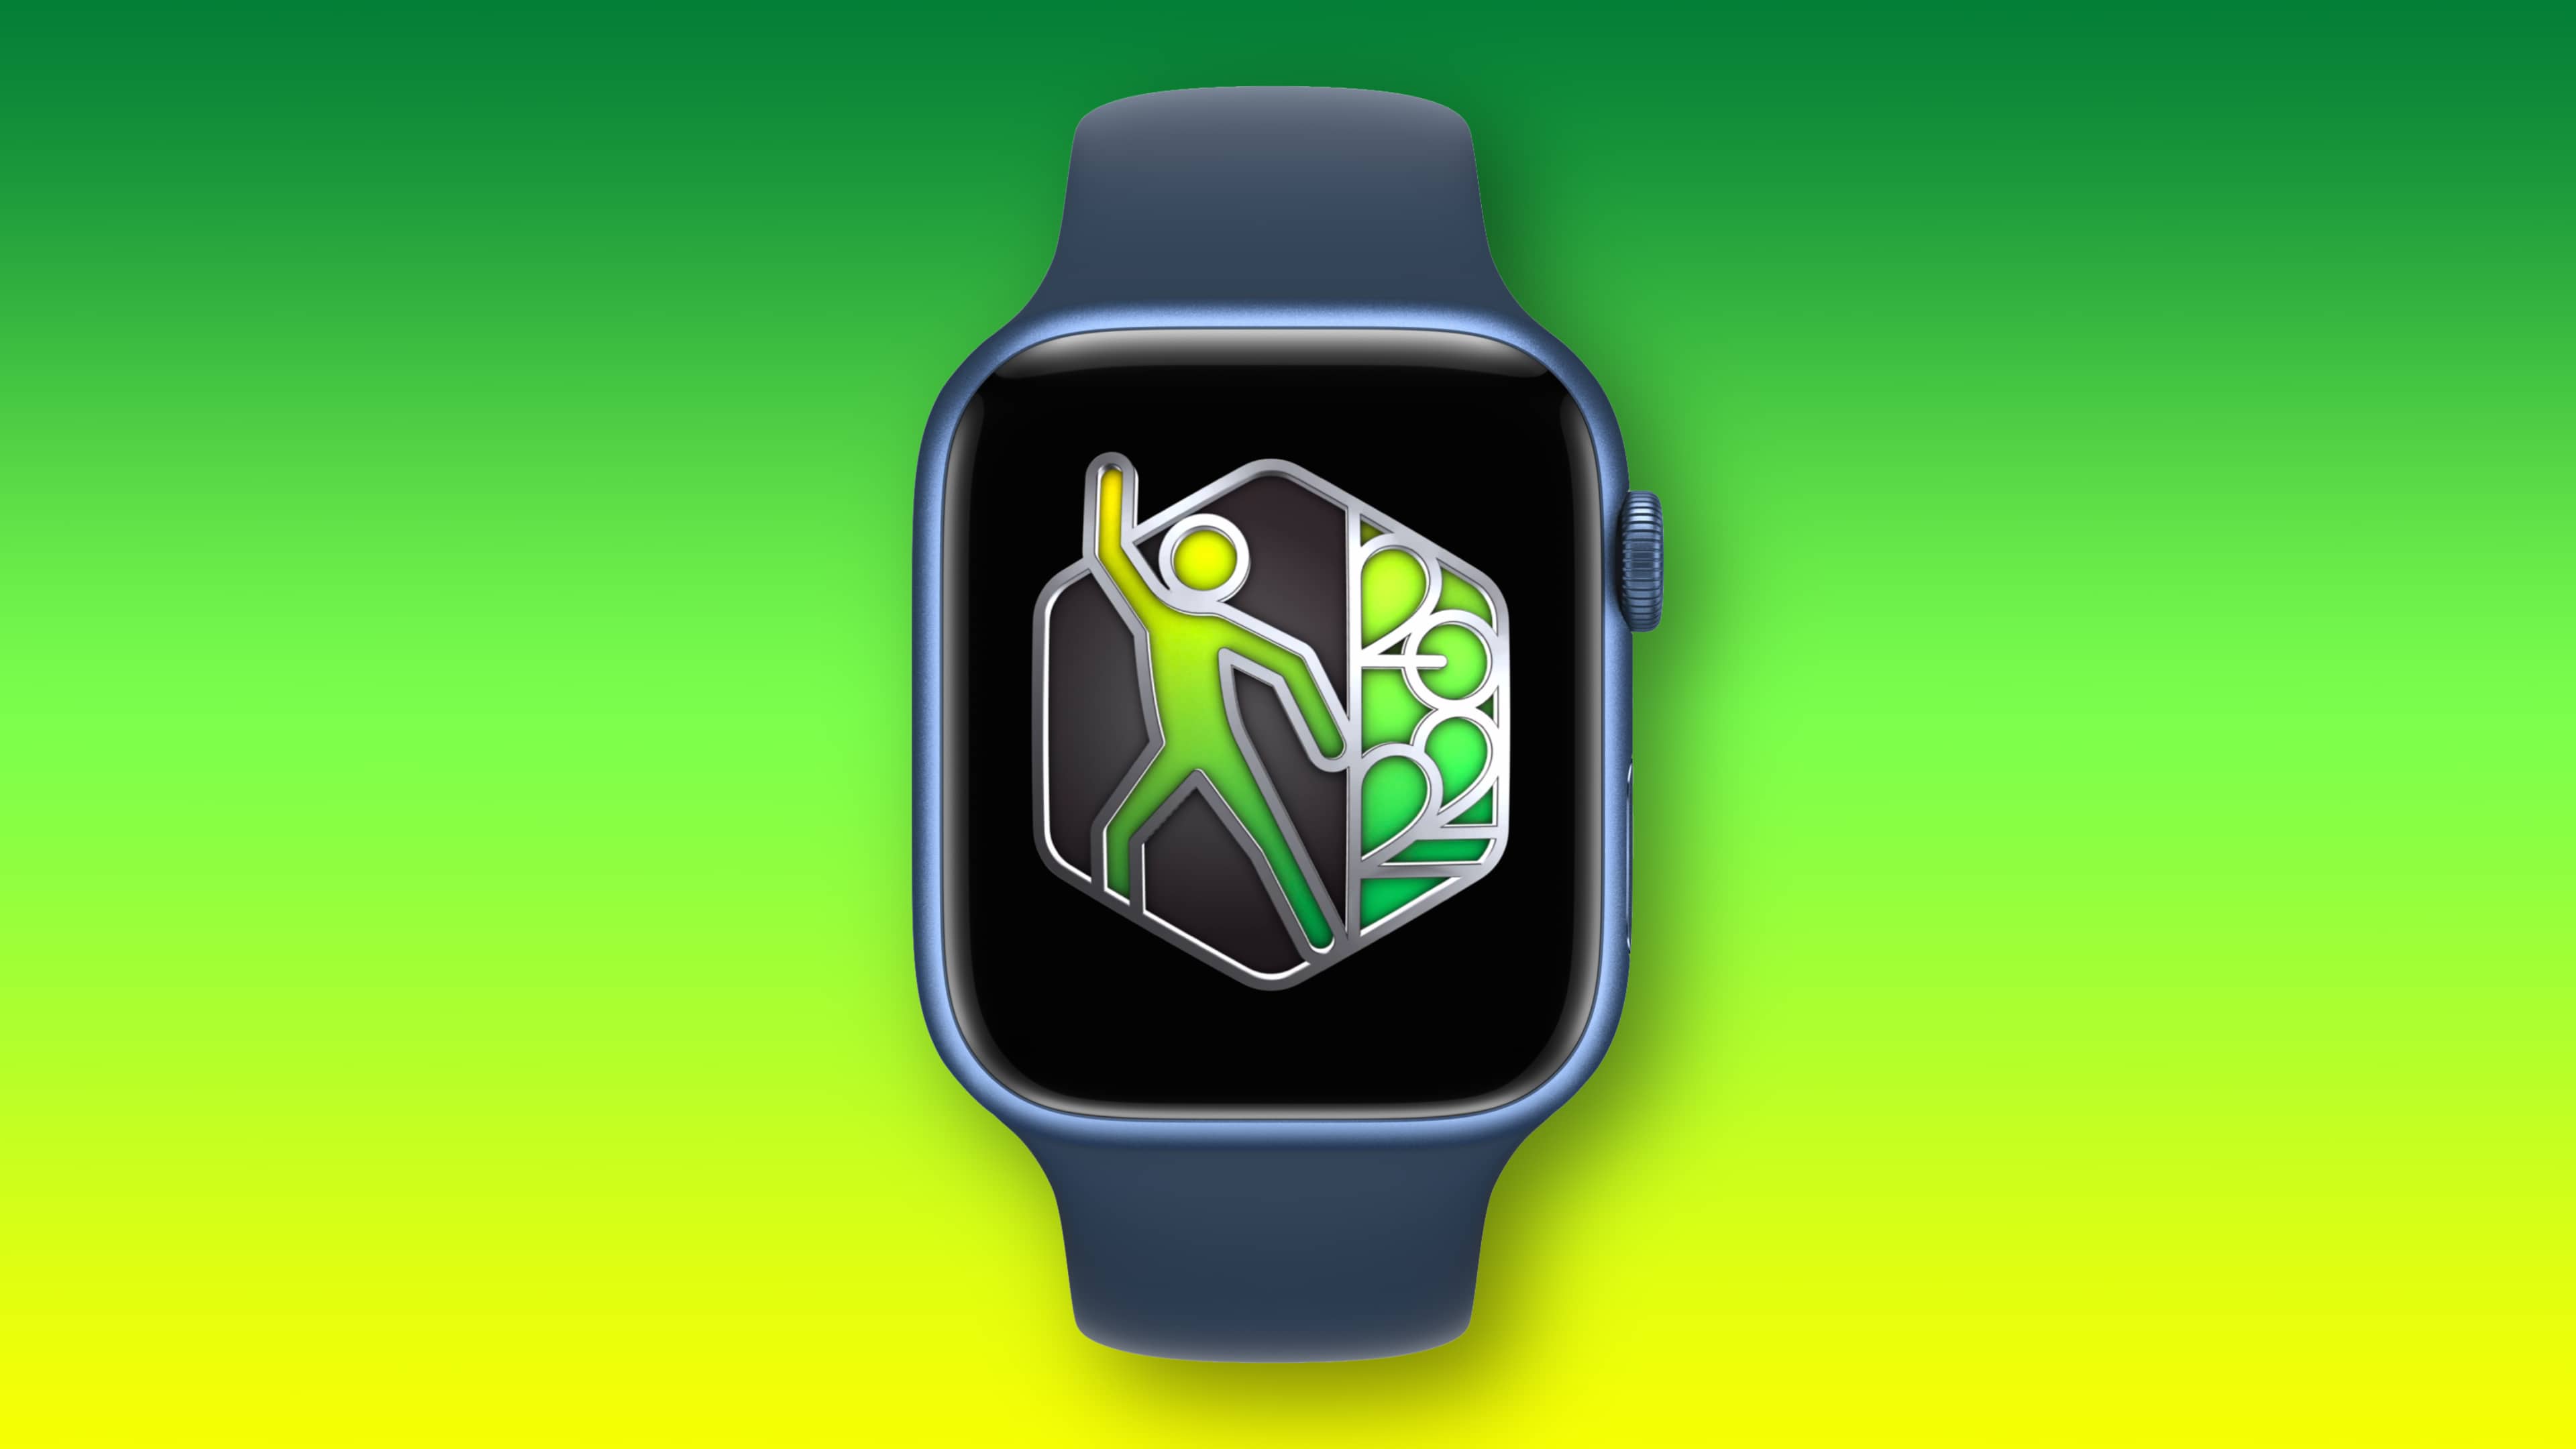 Featured image showing an exclusive virtual award on Apple Watch earned by completing the 2022 International Dance Day activity challenge